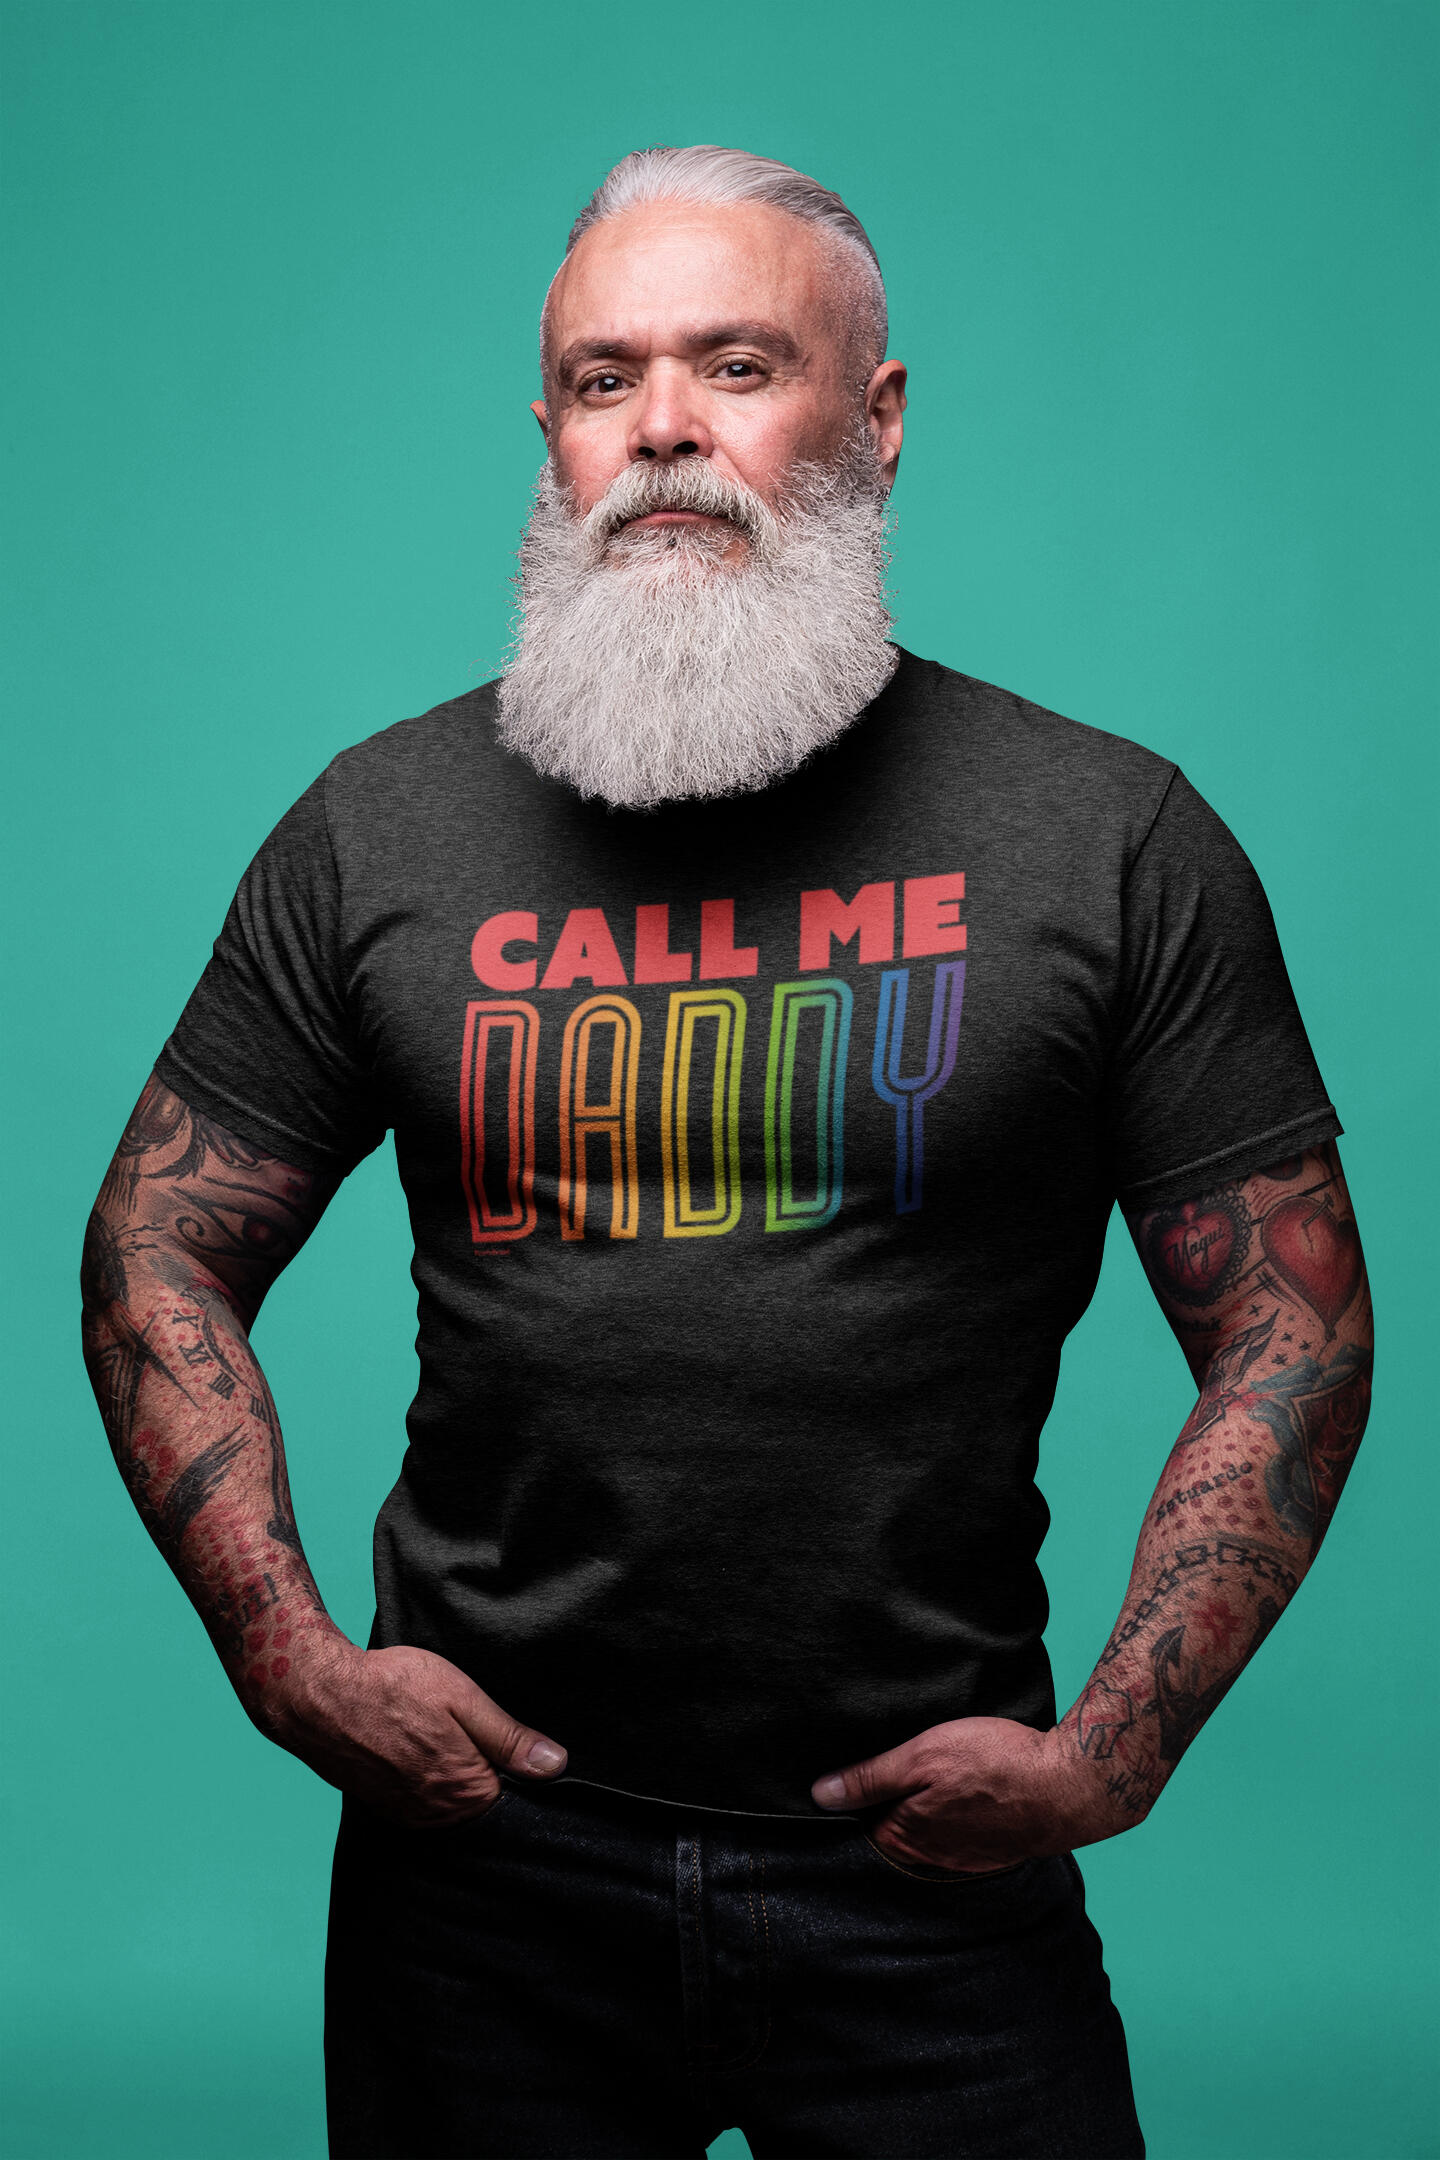 A silver daddy bear wearing a black t-shirt made by BearlyBrand that says "Call me Daddy" in the pride rainbow colors.